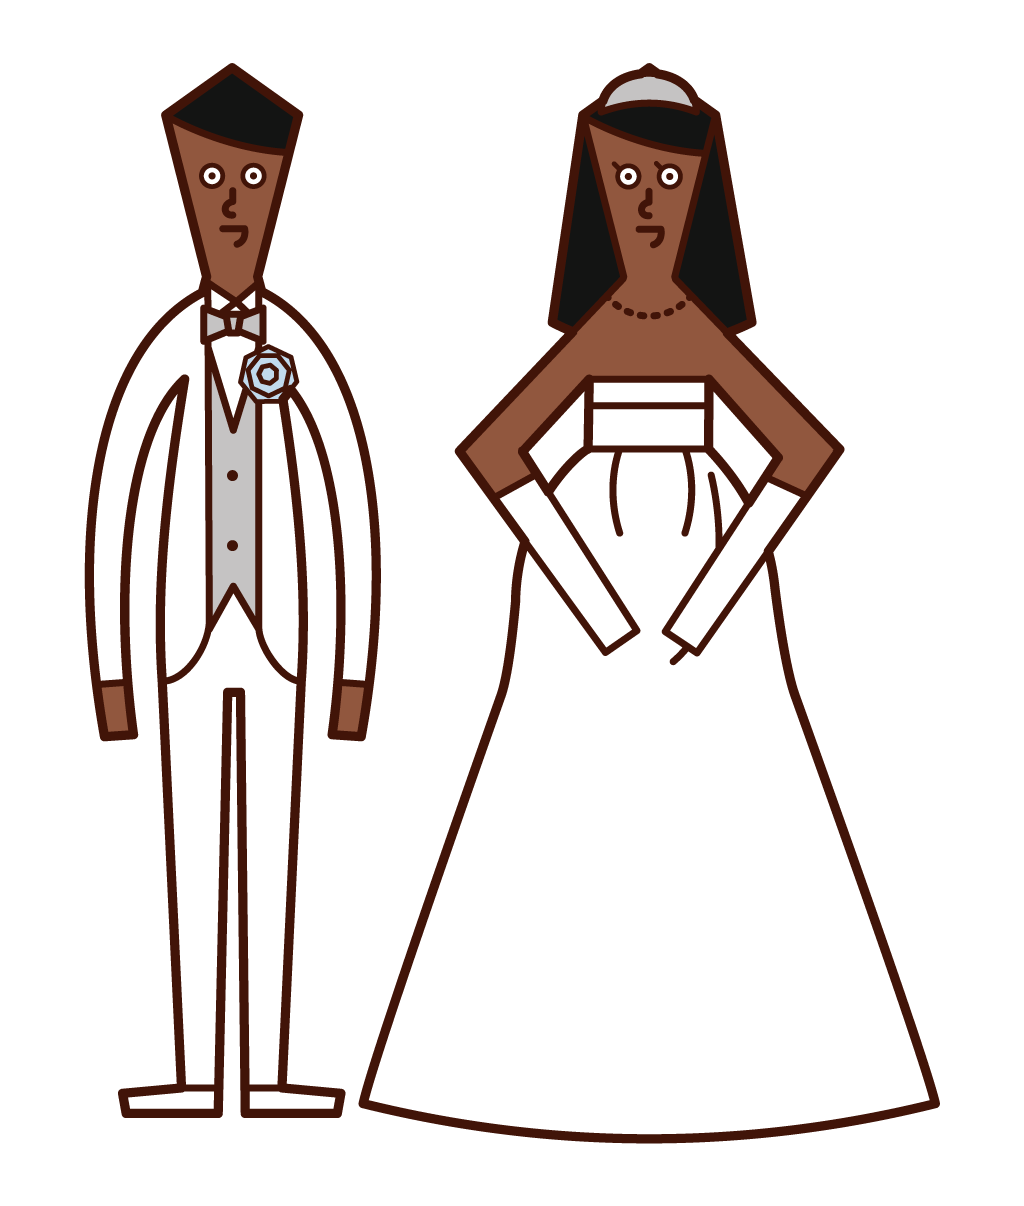 Illustration of a married couple